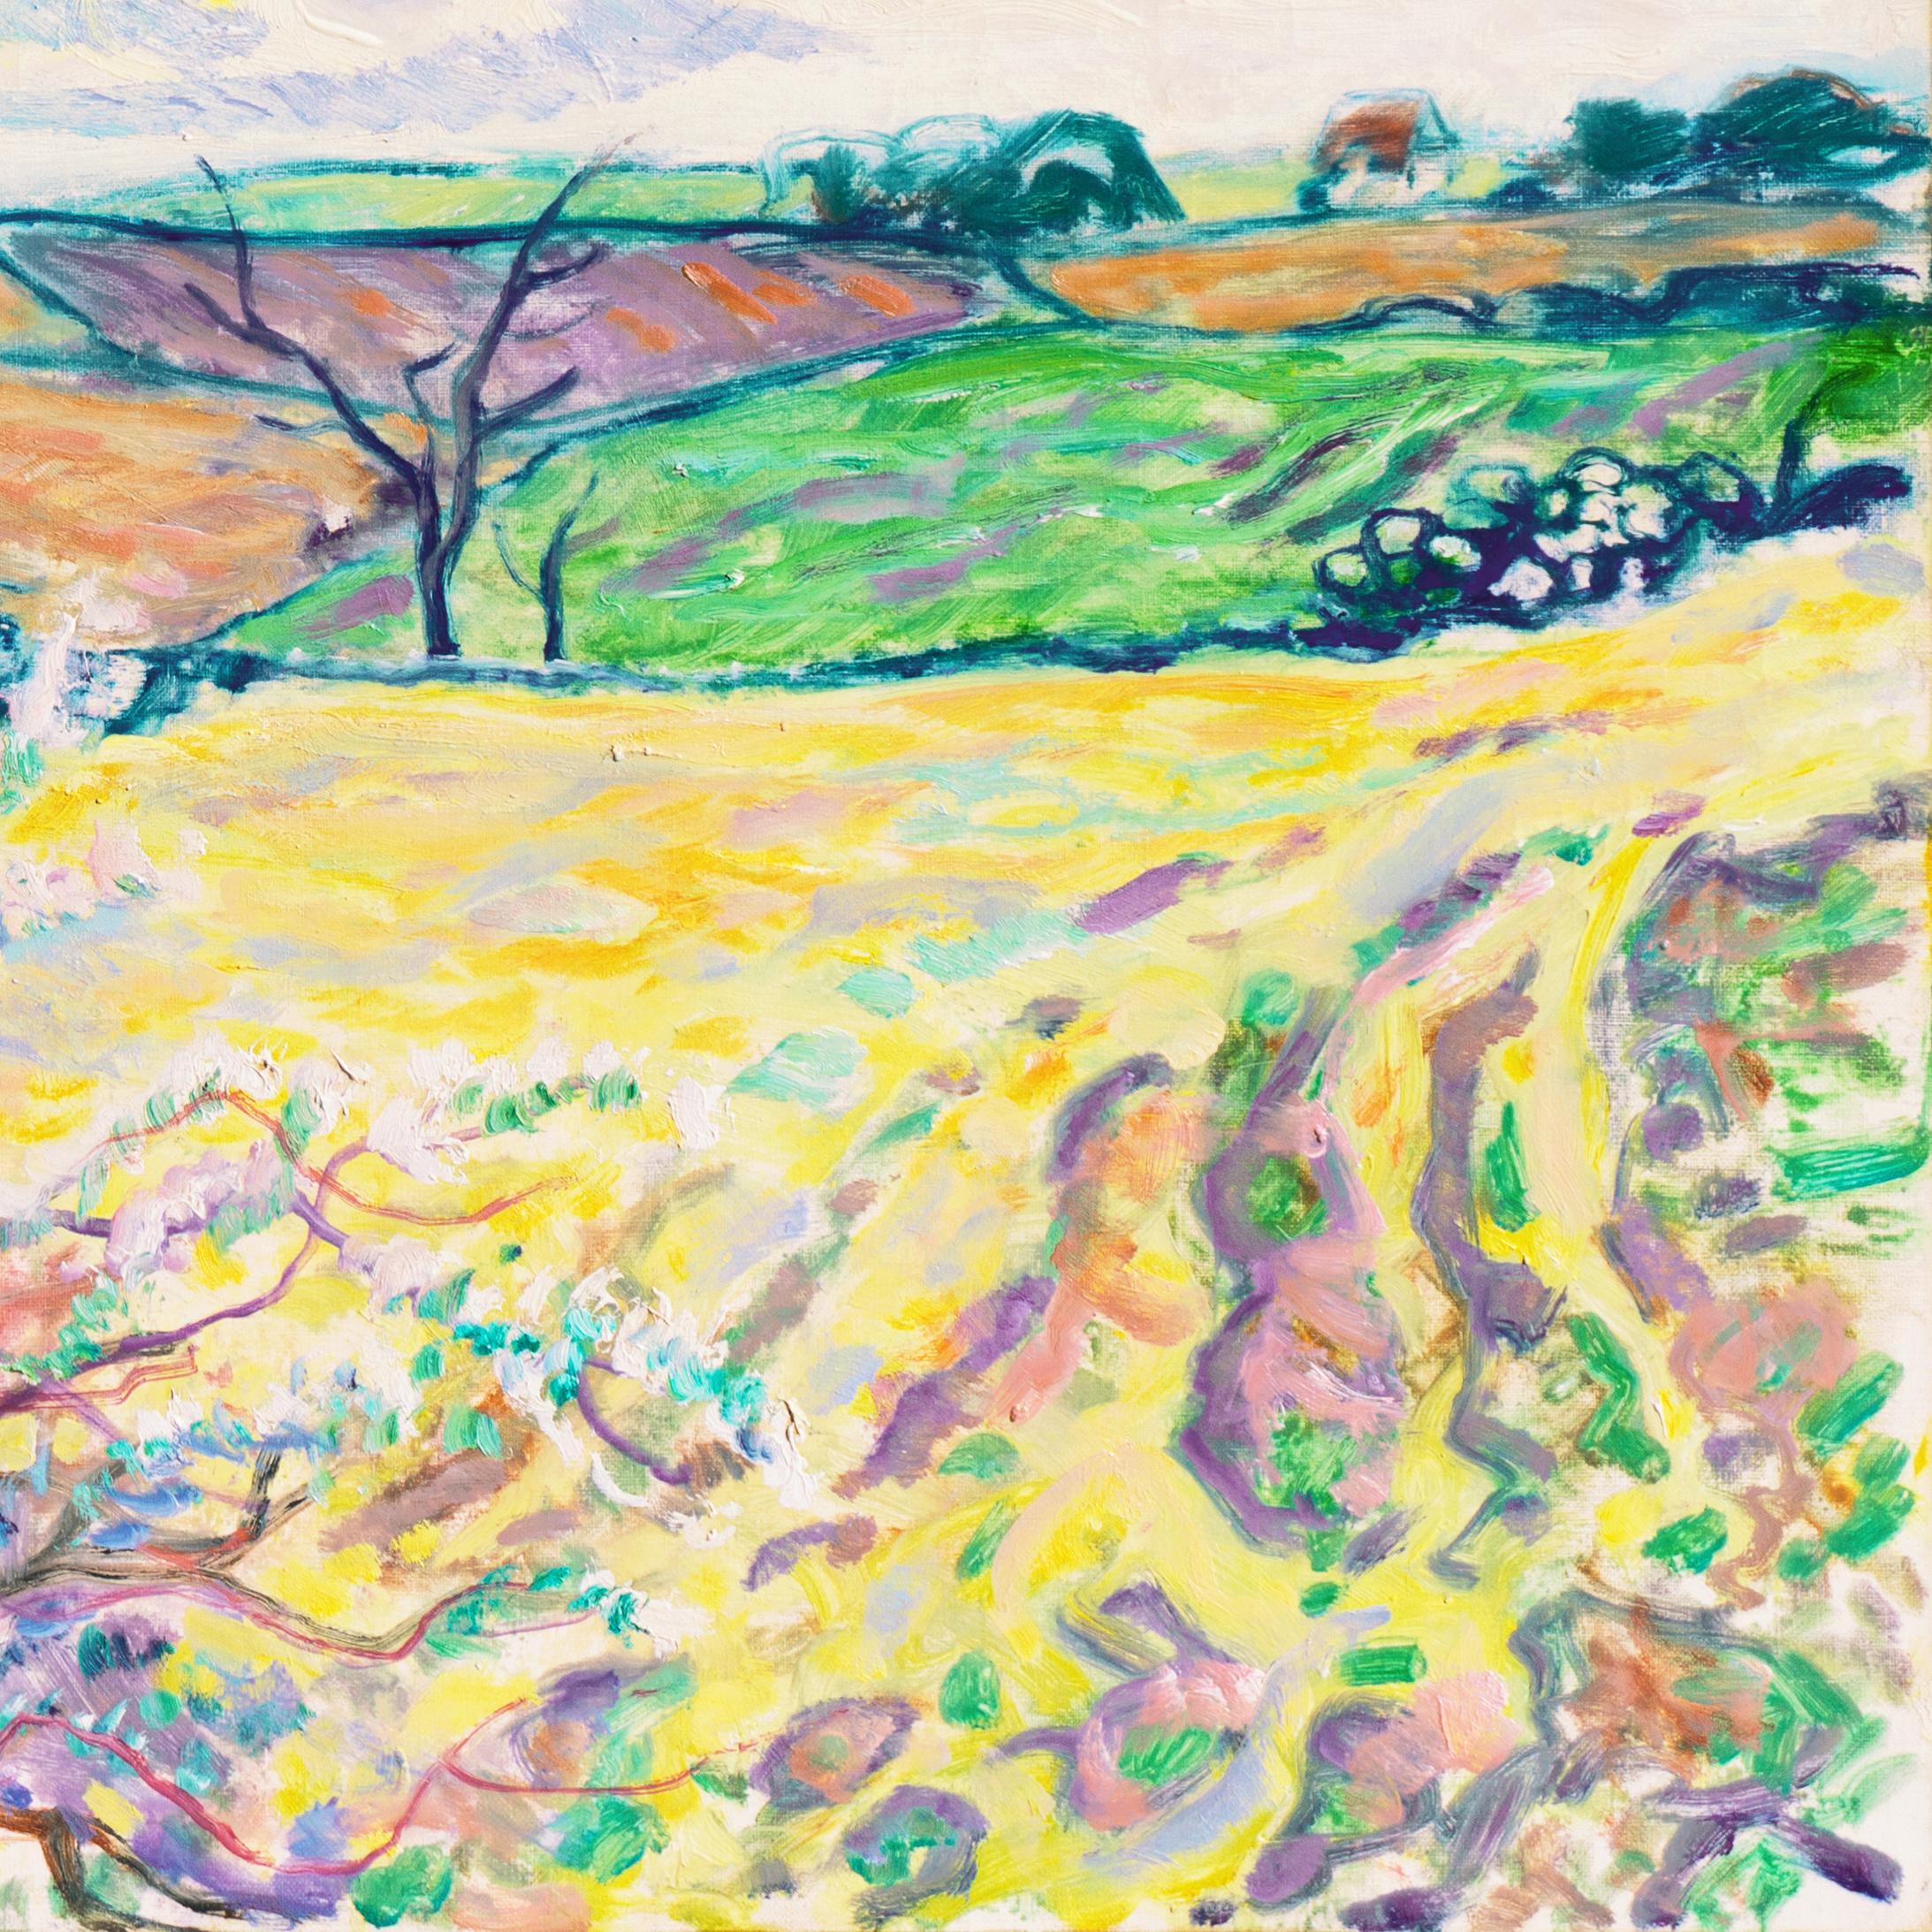 A substantial, sunlit landscape showing a fruit-tree in blossom in the foreground with verdant fields receding towards rolling hills beneath turquoise and lavender clouds.  

Signed lower left, 